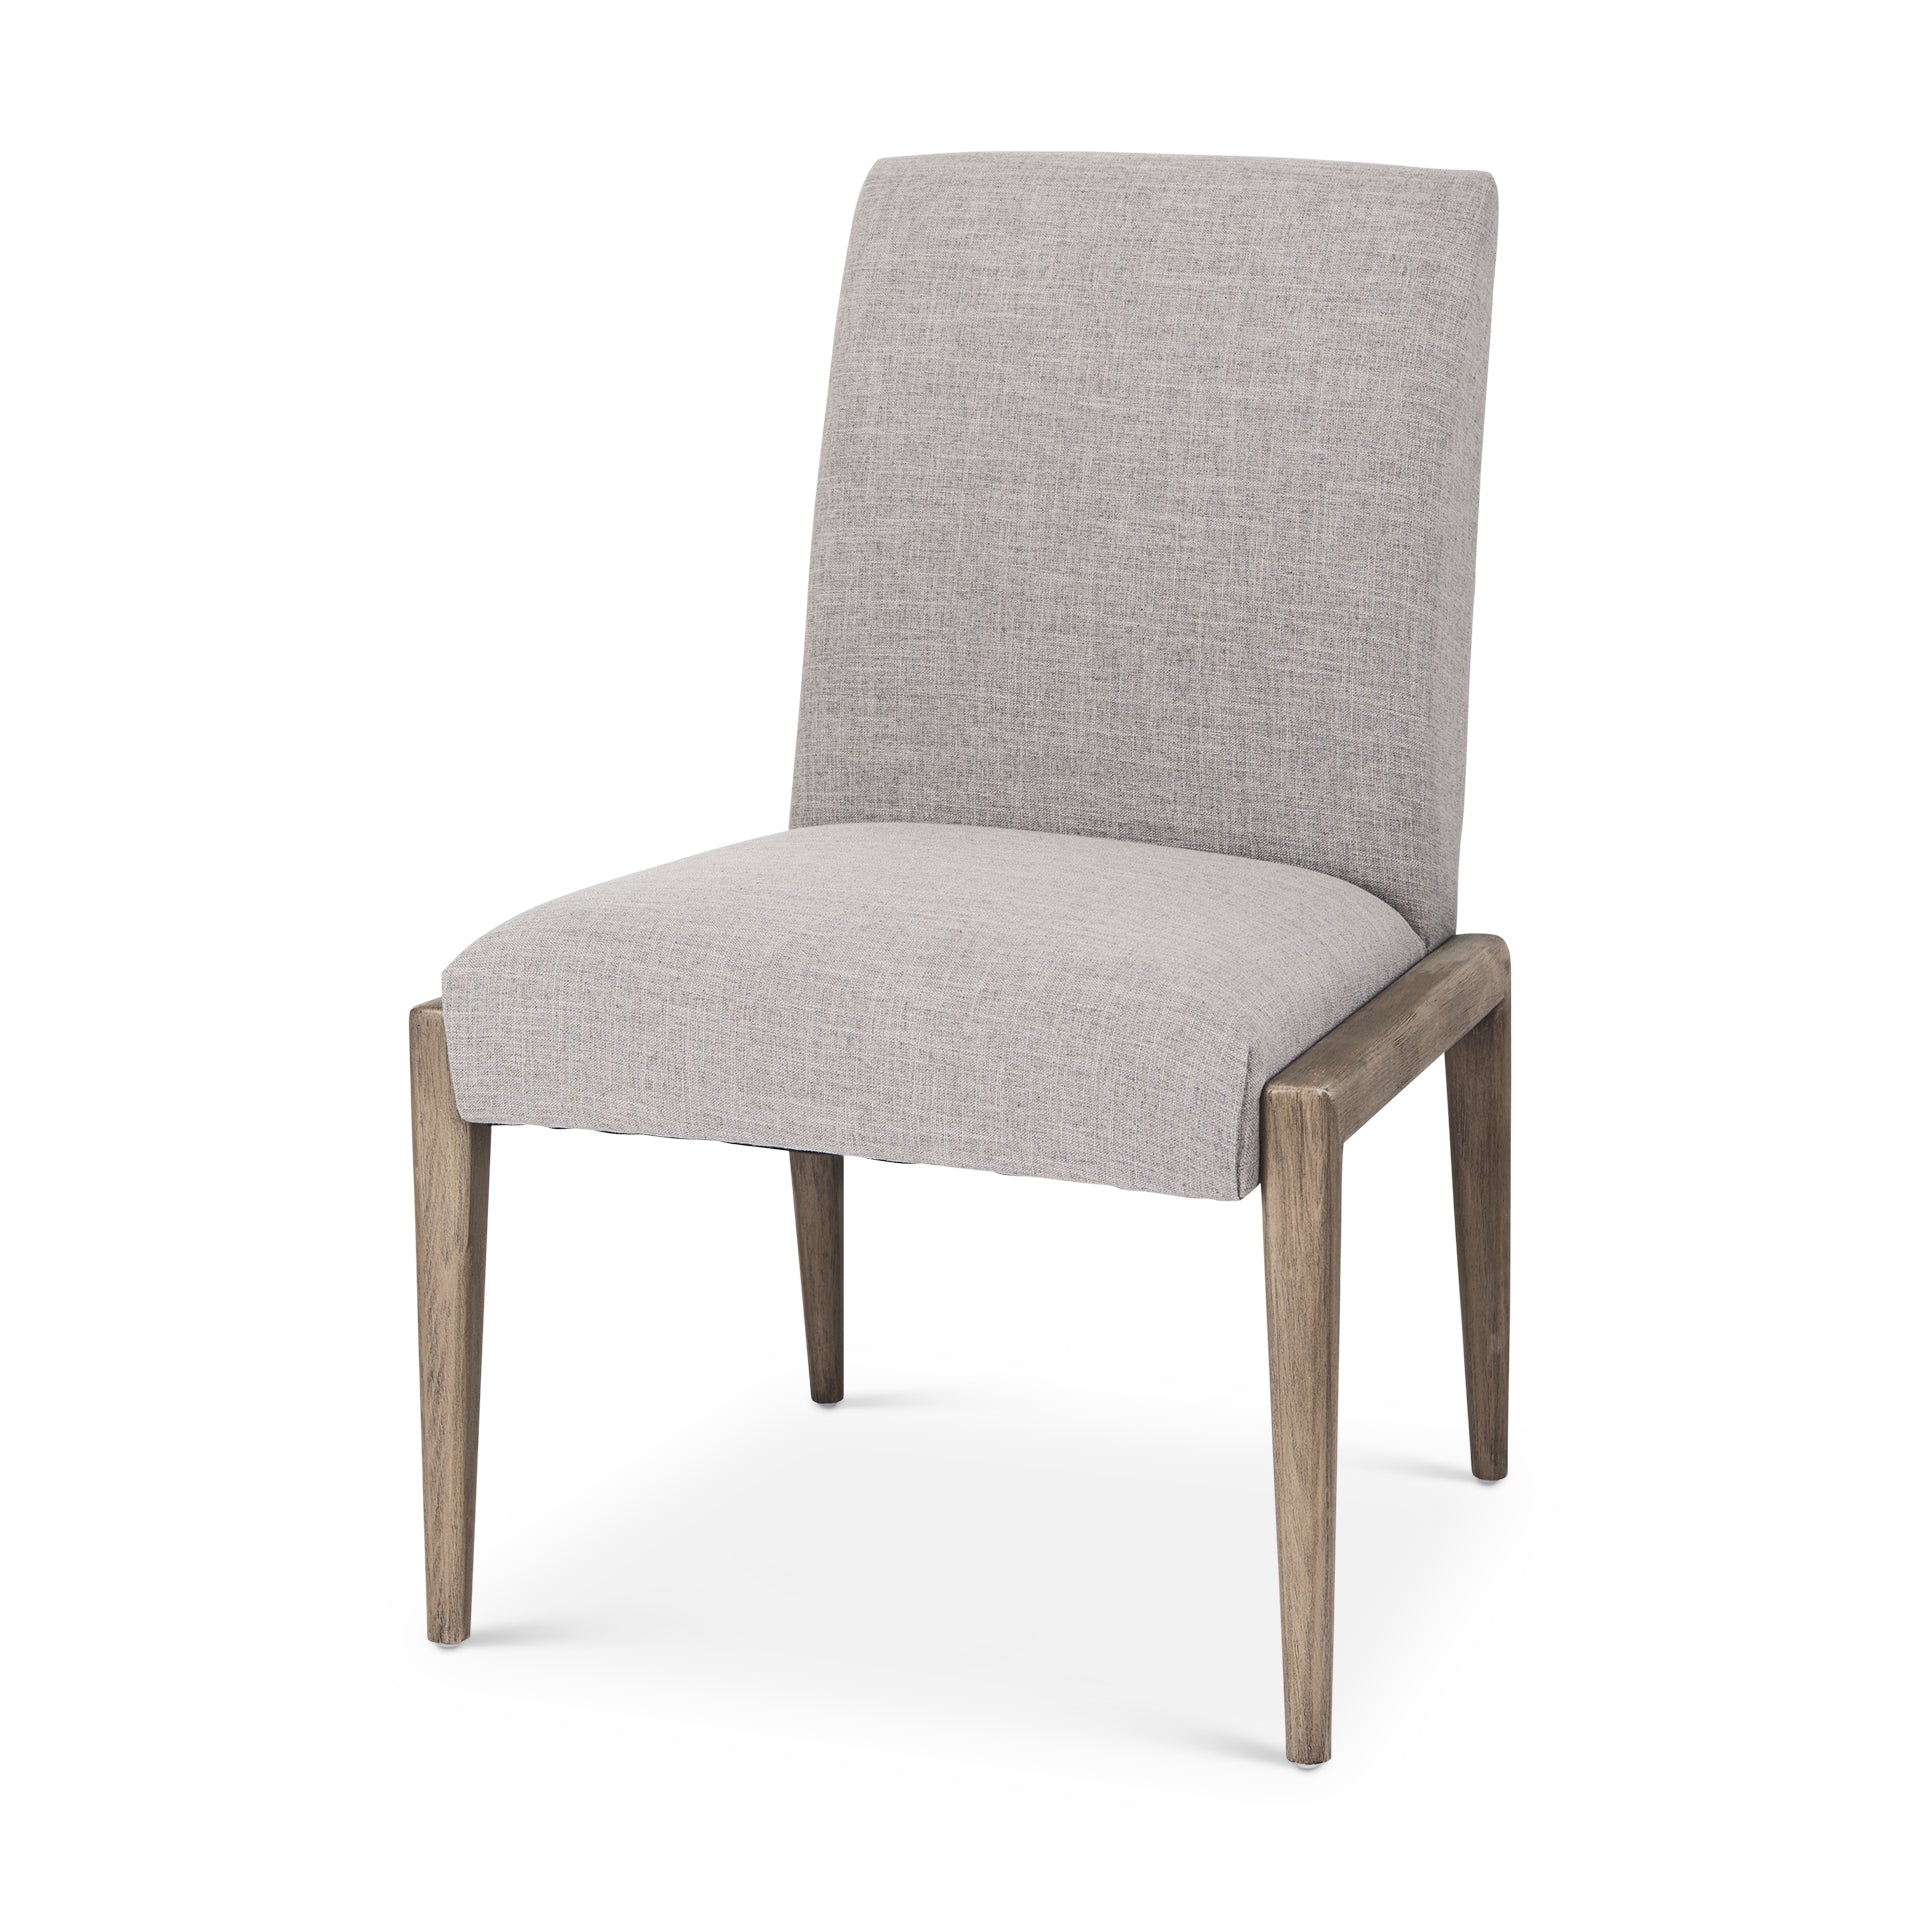 PALISADES ARMLESS GRAY DINING CHAIR - SET OF 2